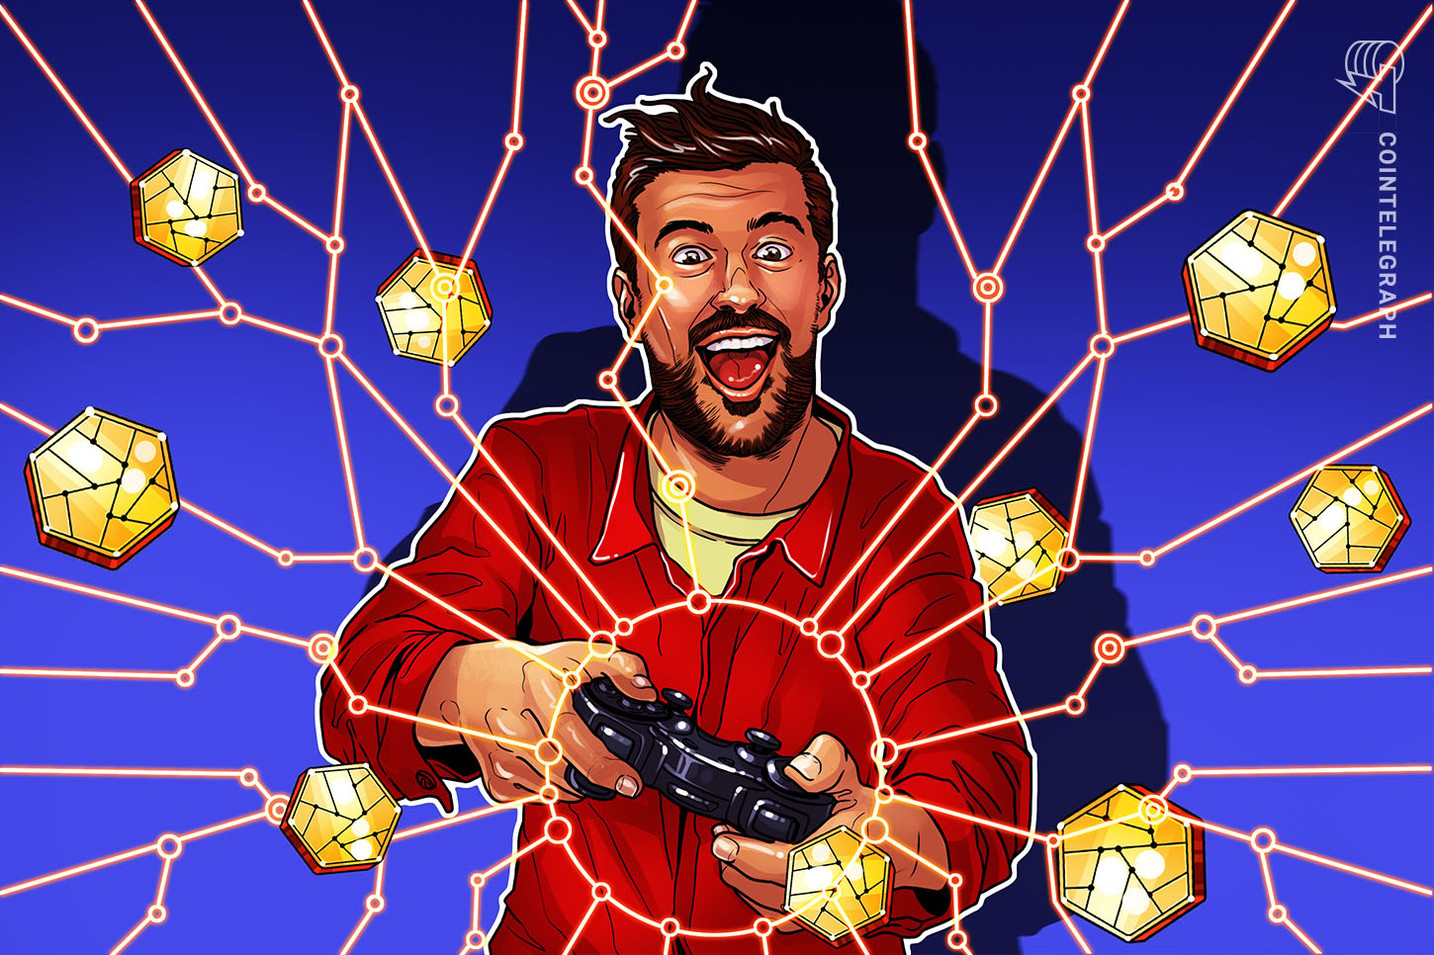 Grinding out a living: Can blockchain games really offer a sustainable income?